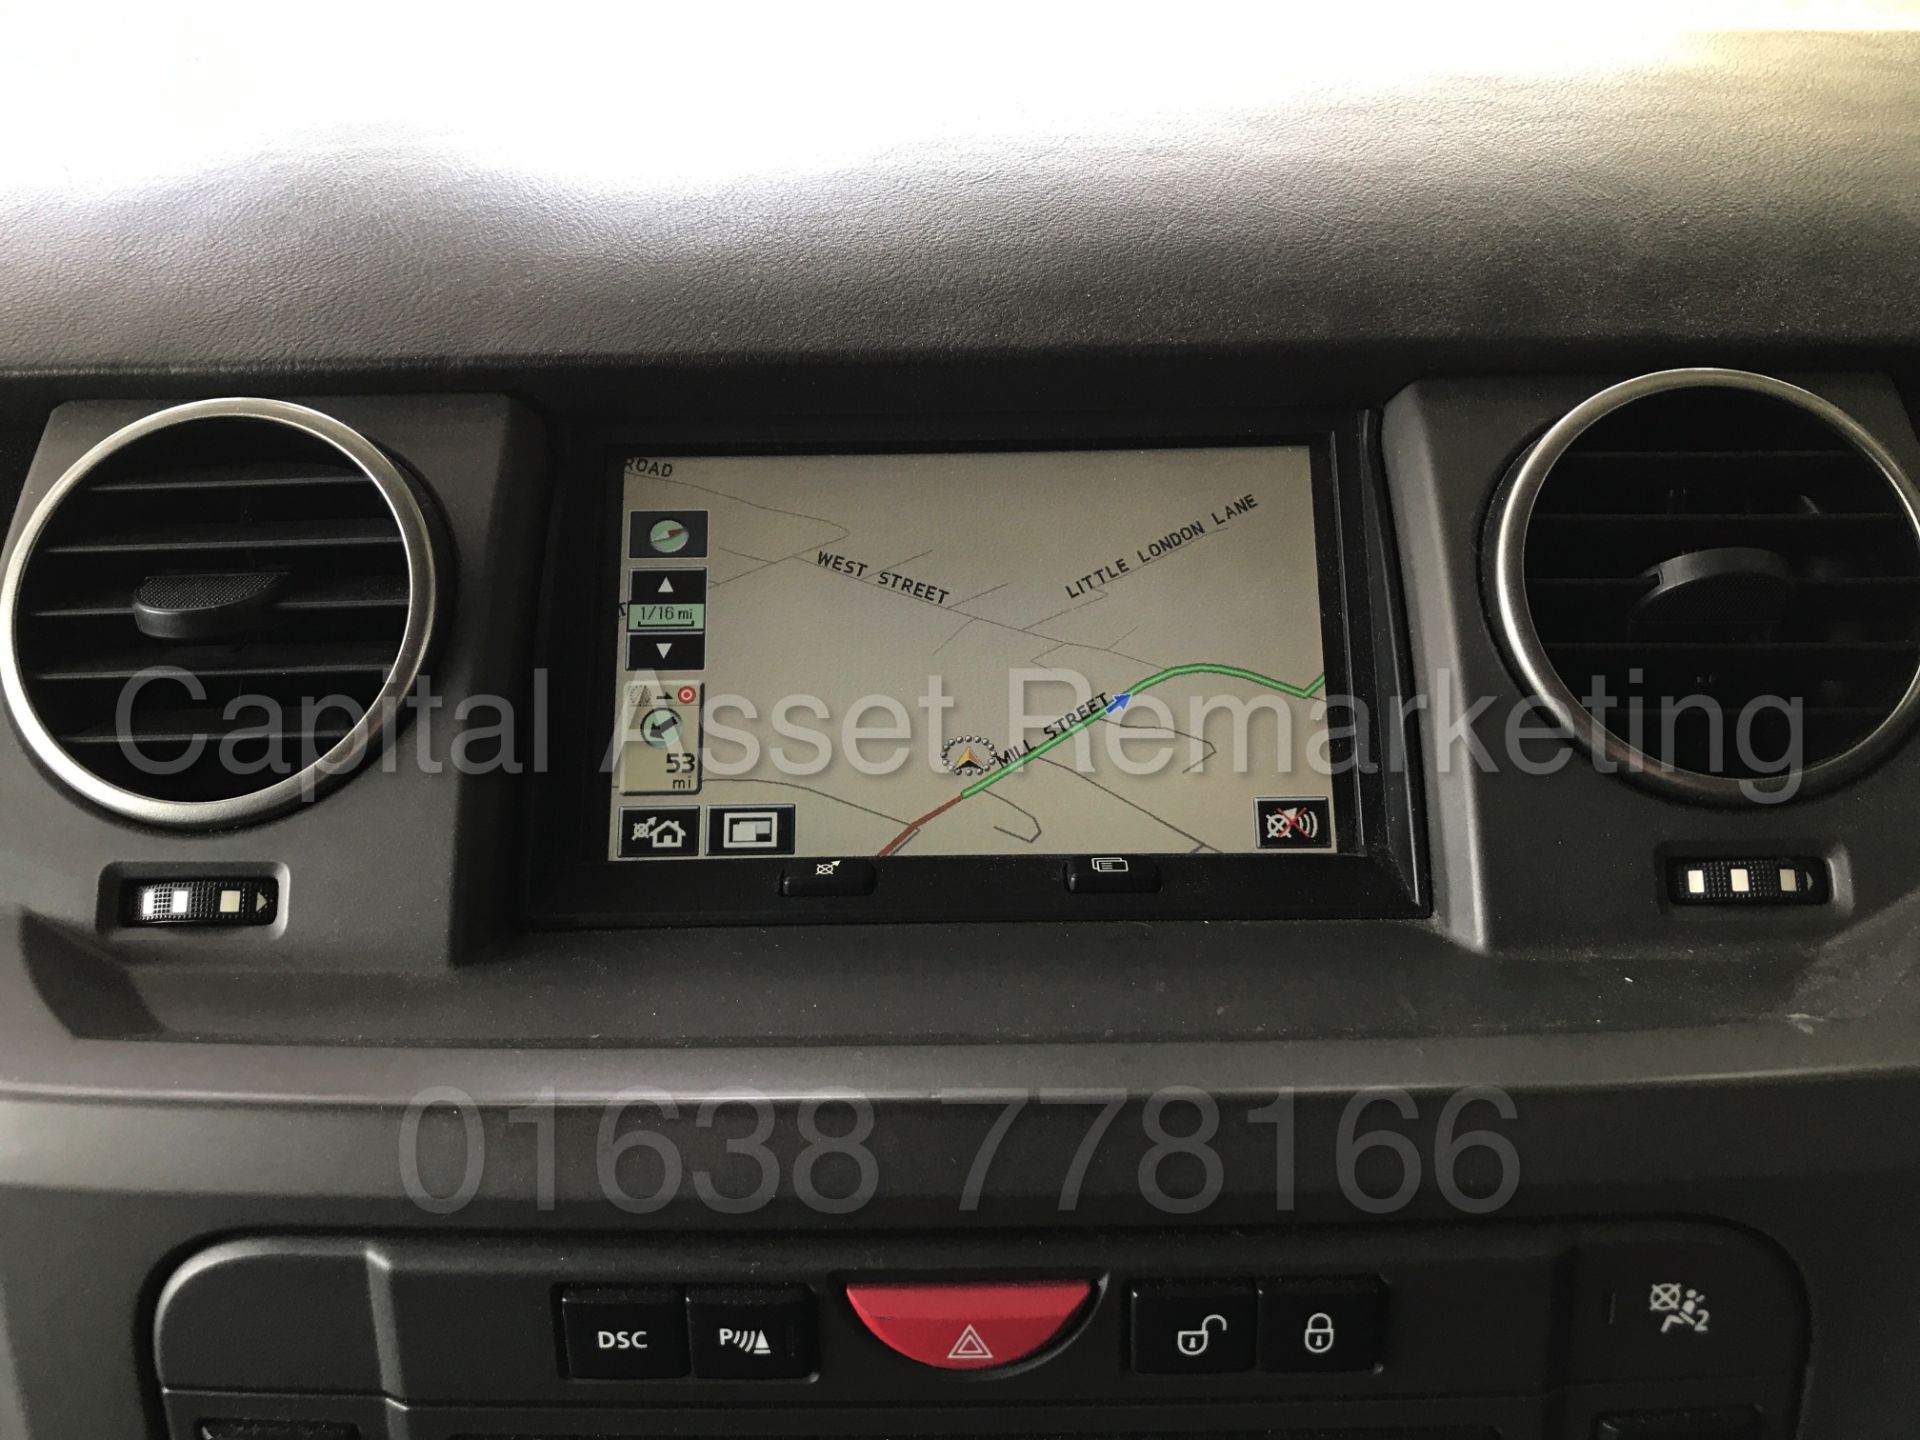 (On Sale) LAND ROVER DISCOVERY 3 (2005 - FACELIFT MODEL) 'TDV6 - AUTO - 7 SEATER - SAT NAV' (NO VAT) - Image 27 of 36